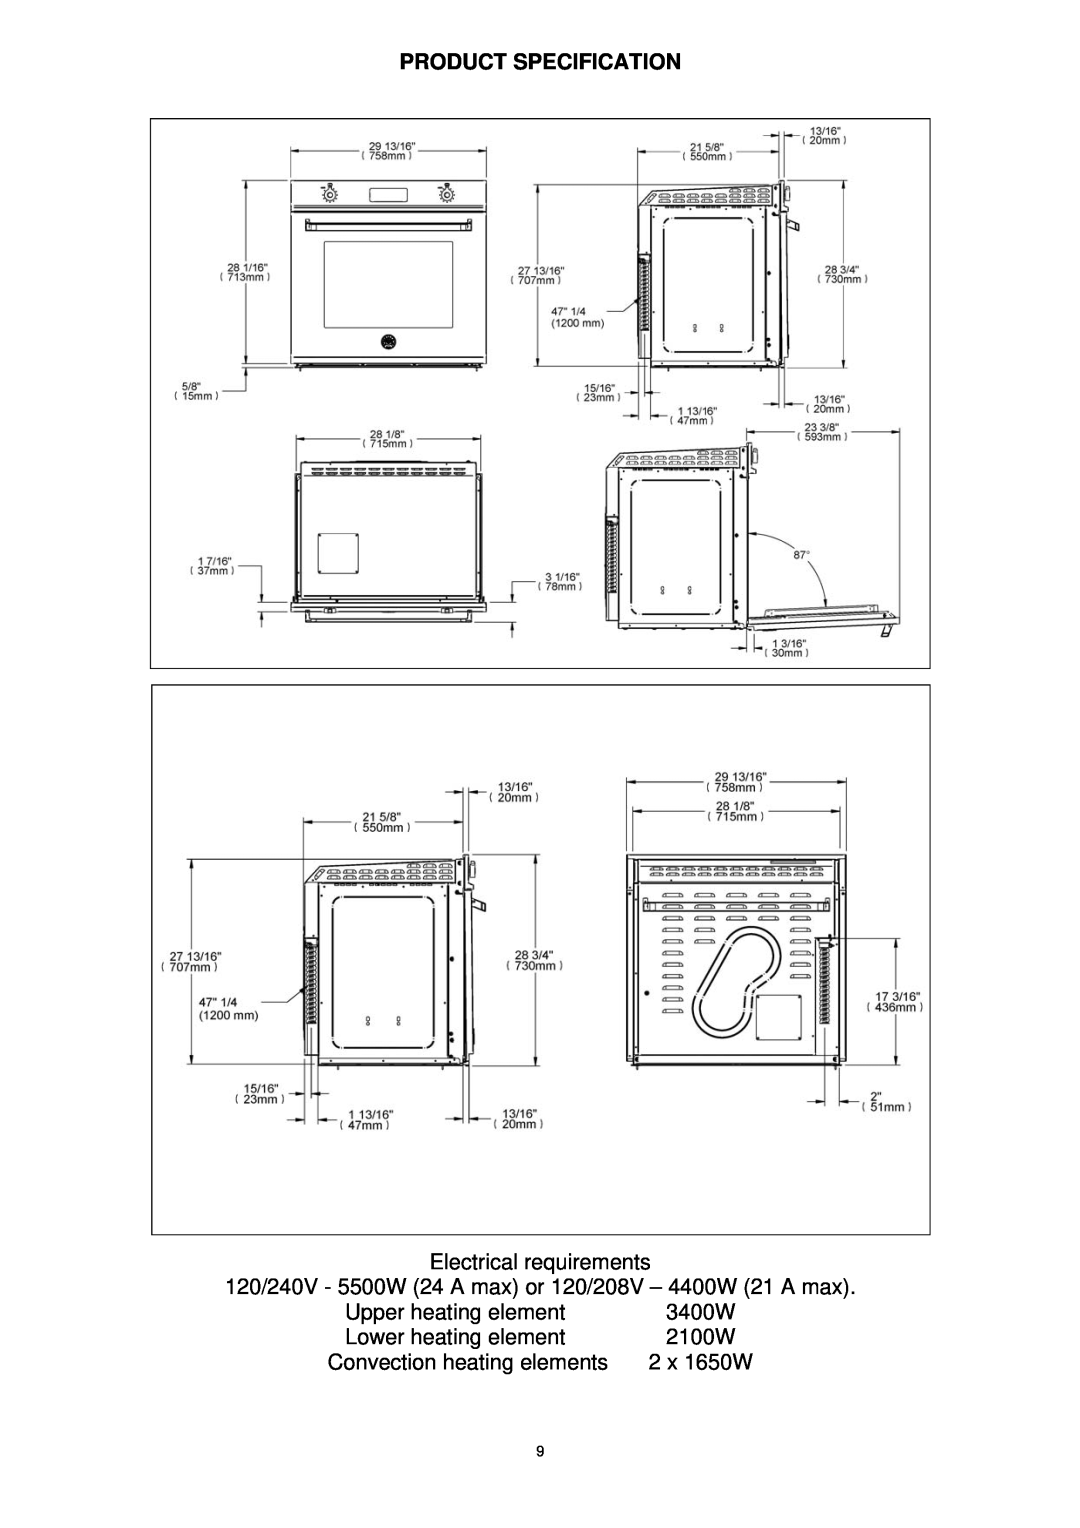 Bertazzoni F30PROXV manual Electrical requirements, Upper heating element, 3400W, Lower heating element, 2100W, 2 x 1650W 